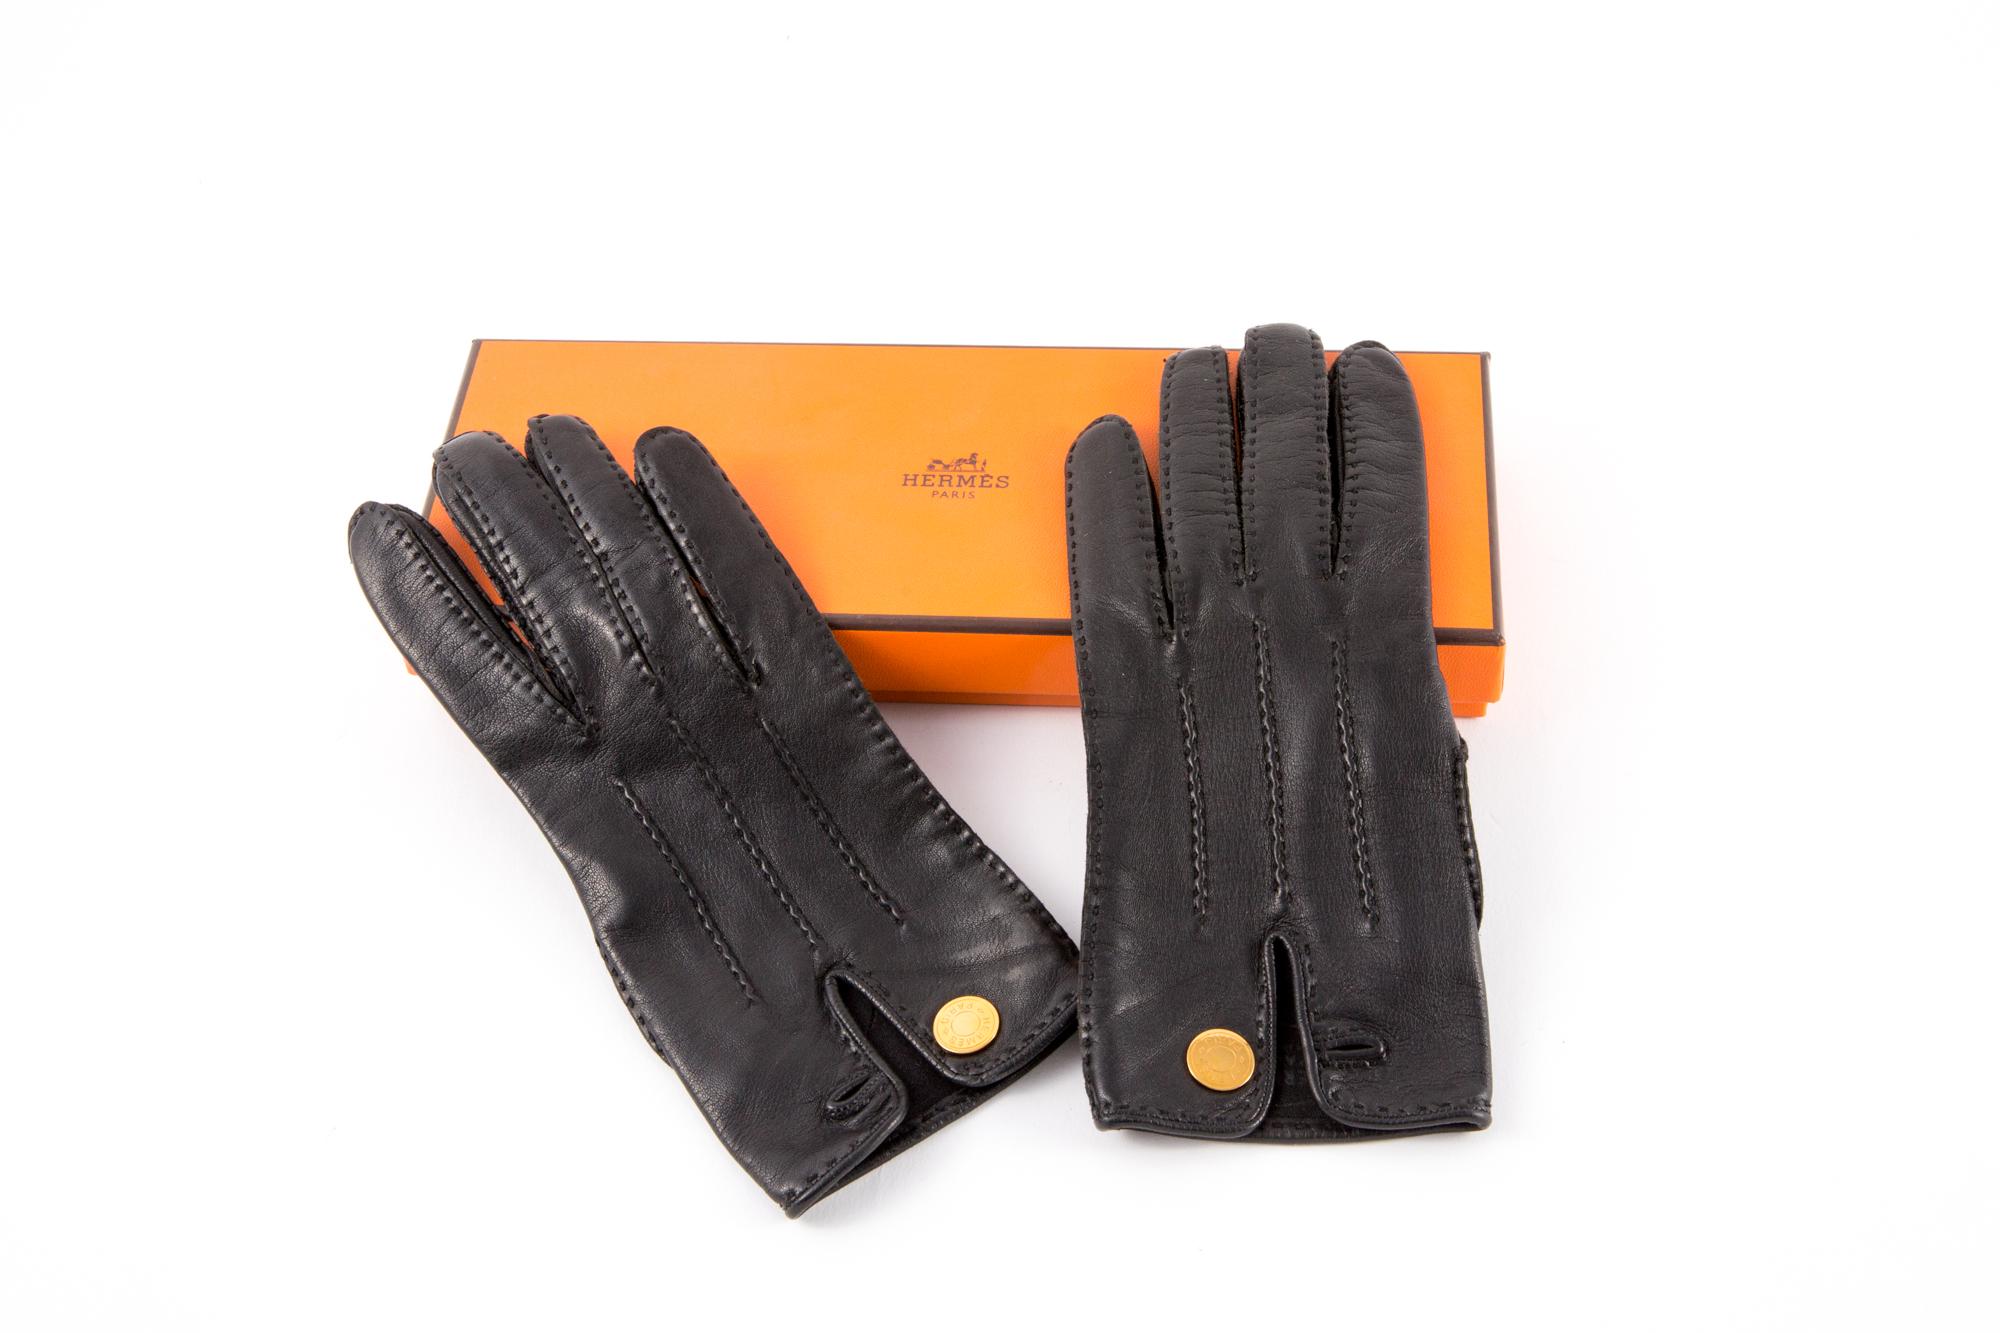 Hermes black lamb leather gloves featuring gold-tone logo stud, an internal logo stamp.
Delivered in original box as per image.
In good vintage condition. Made in France.
Estimated size: 6 fr/ XS us/ 6.5 uk
We guarantee you will receive this